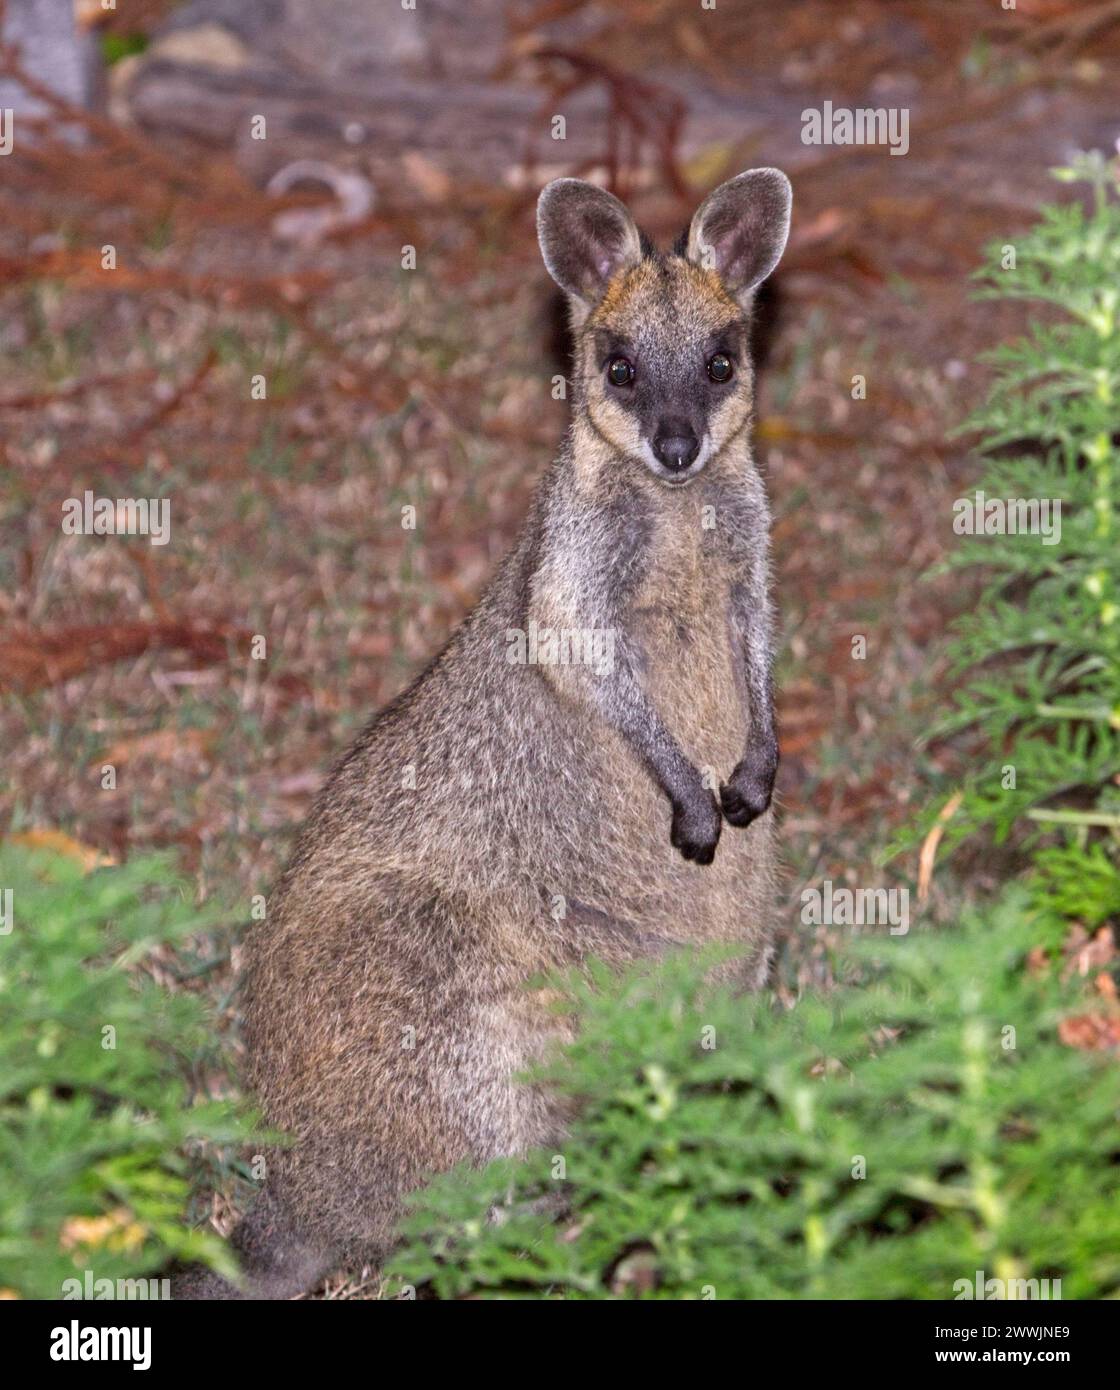 Swamp wallaby in front of garden room Stock Photo